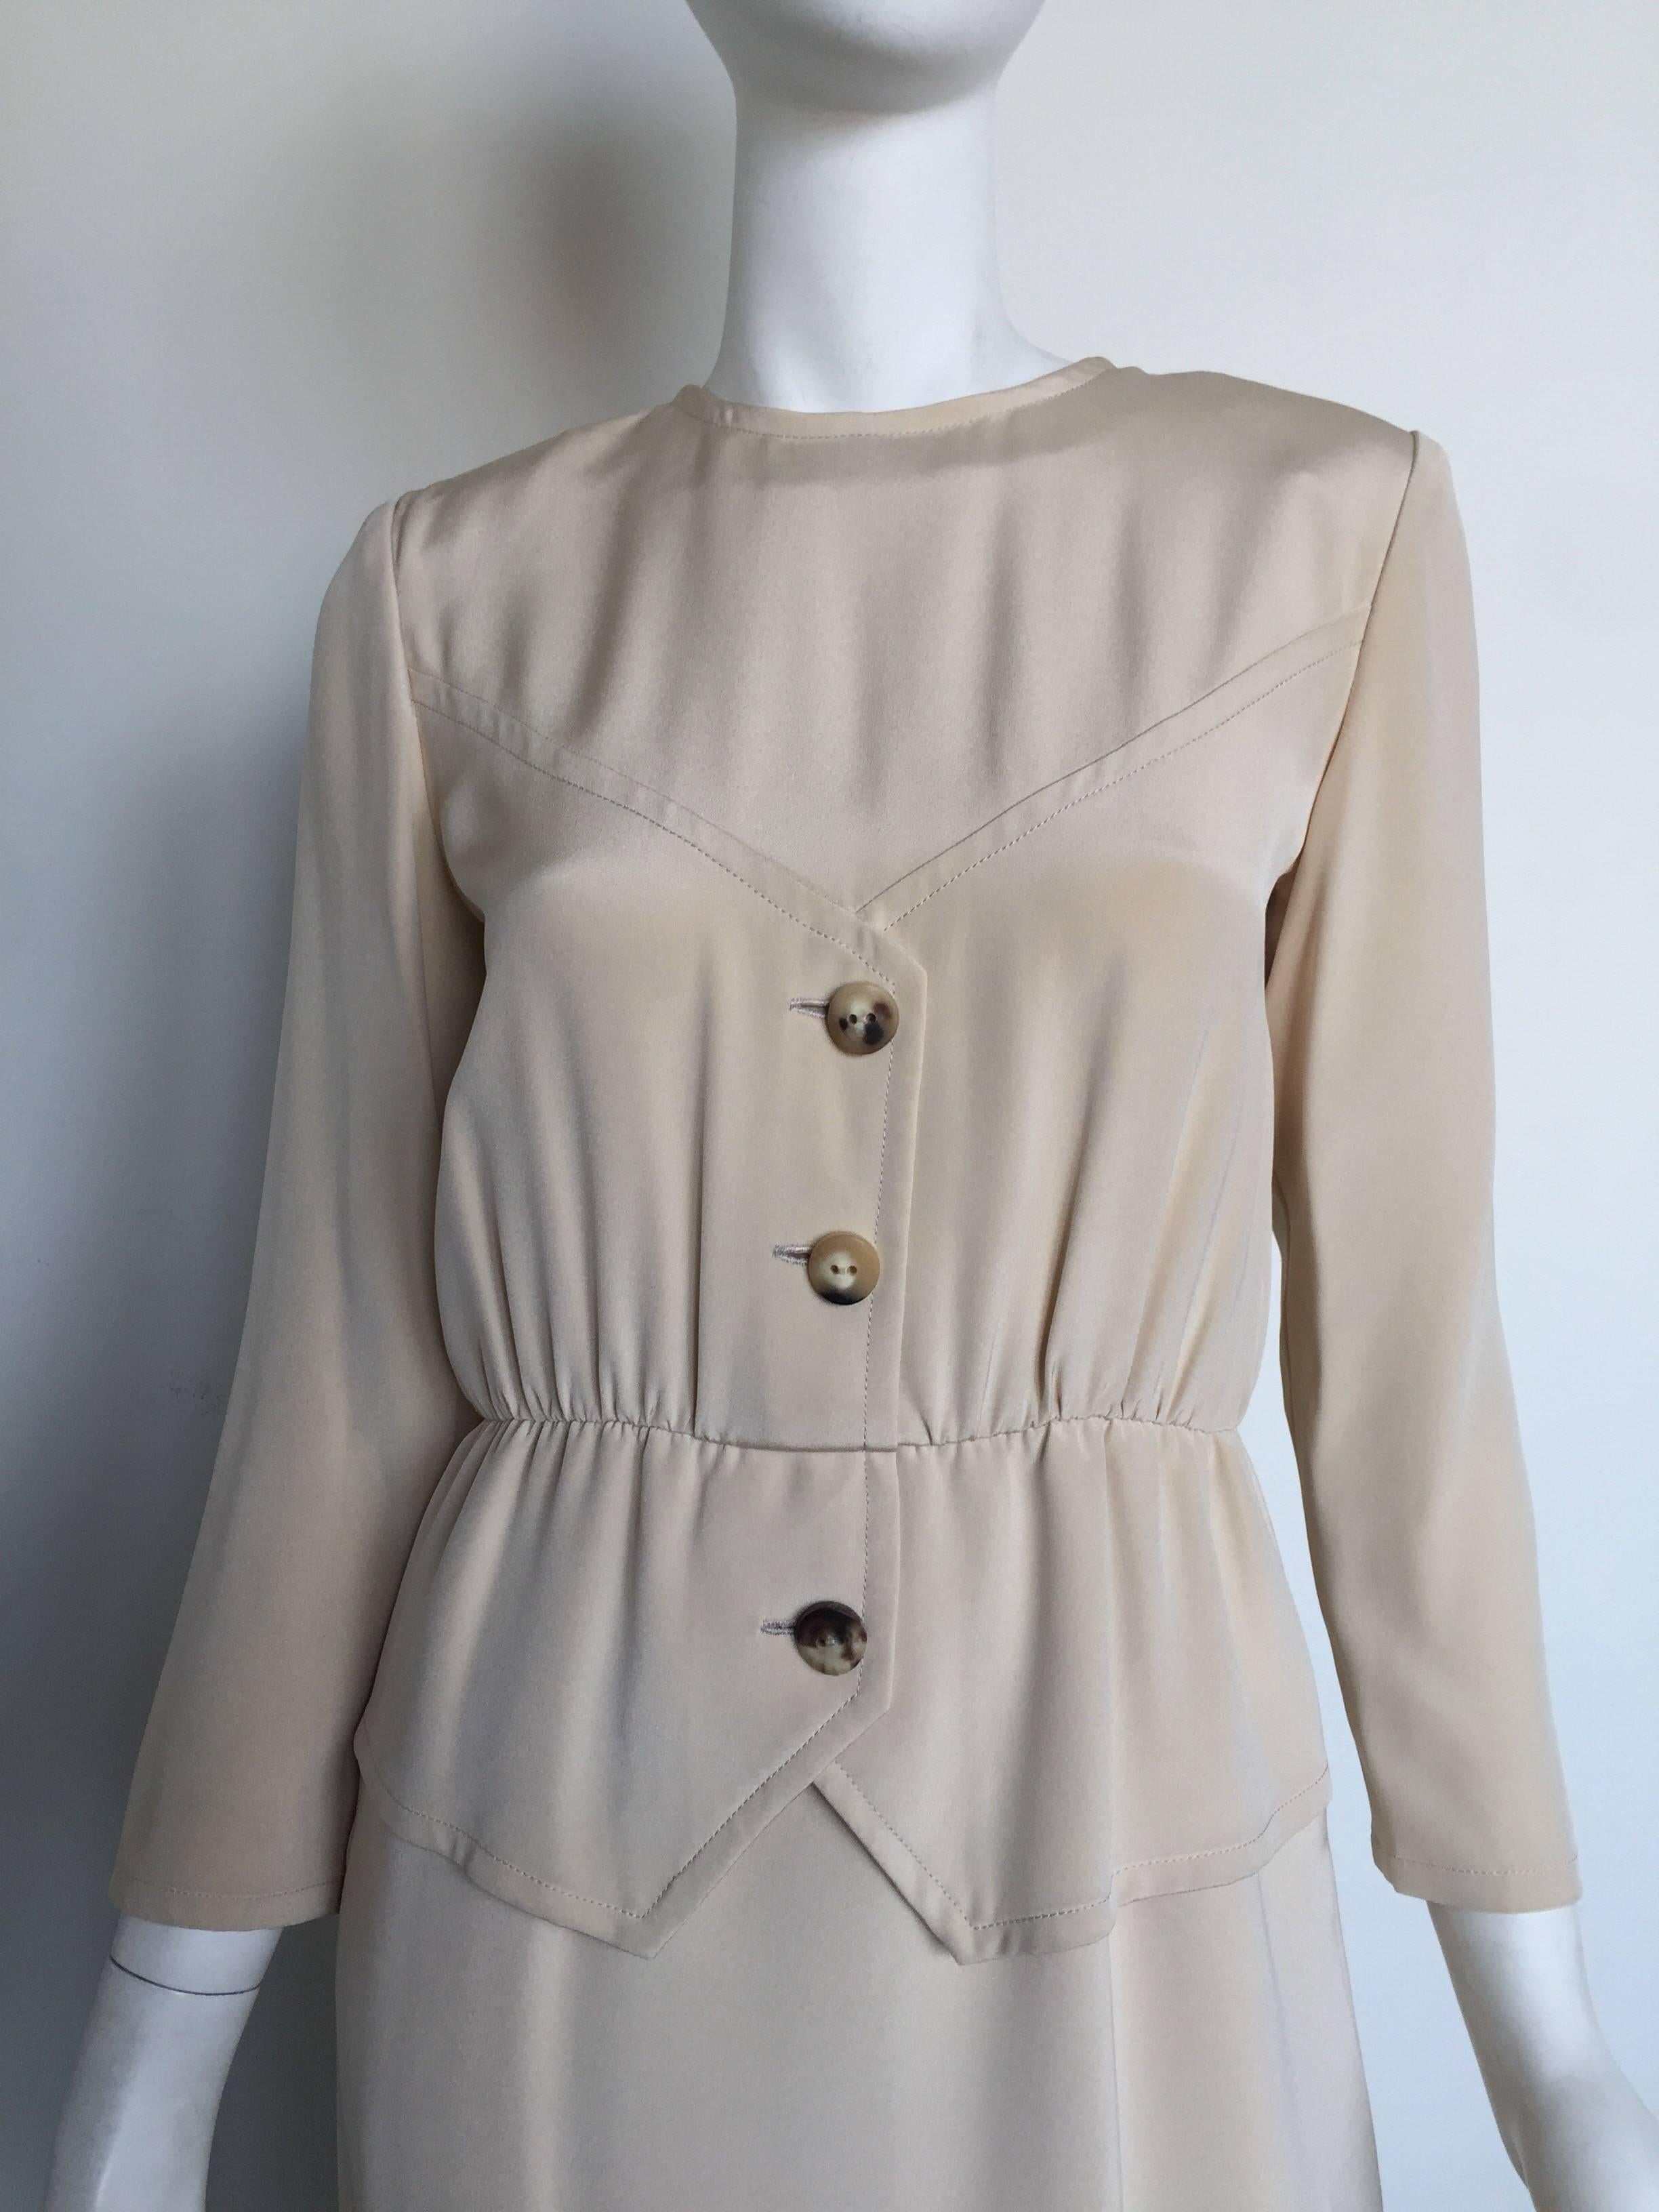 Bill Blass Khaki Snakskin Belted Dress In Good Condition For Sale In New York, NY